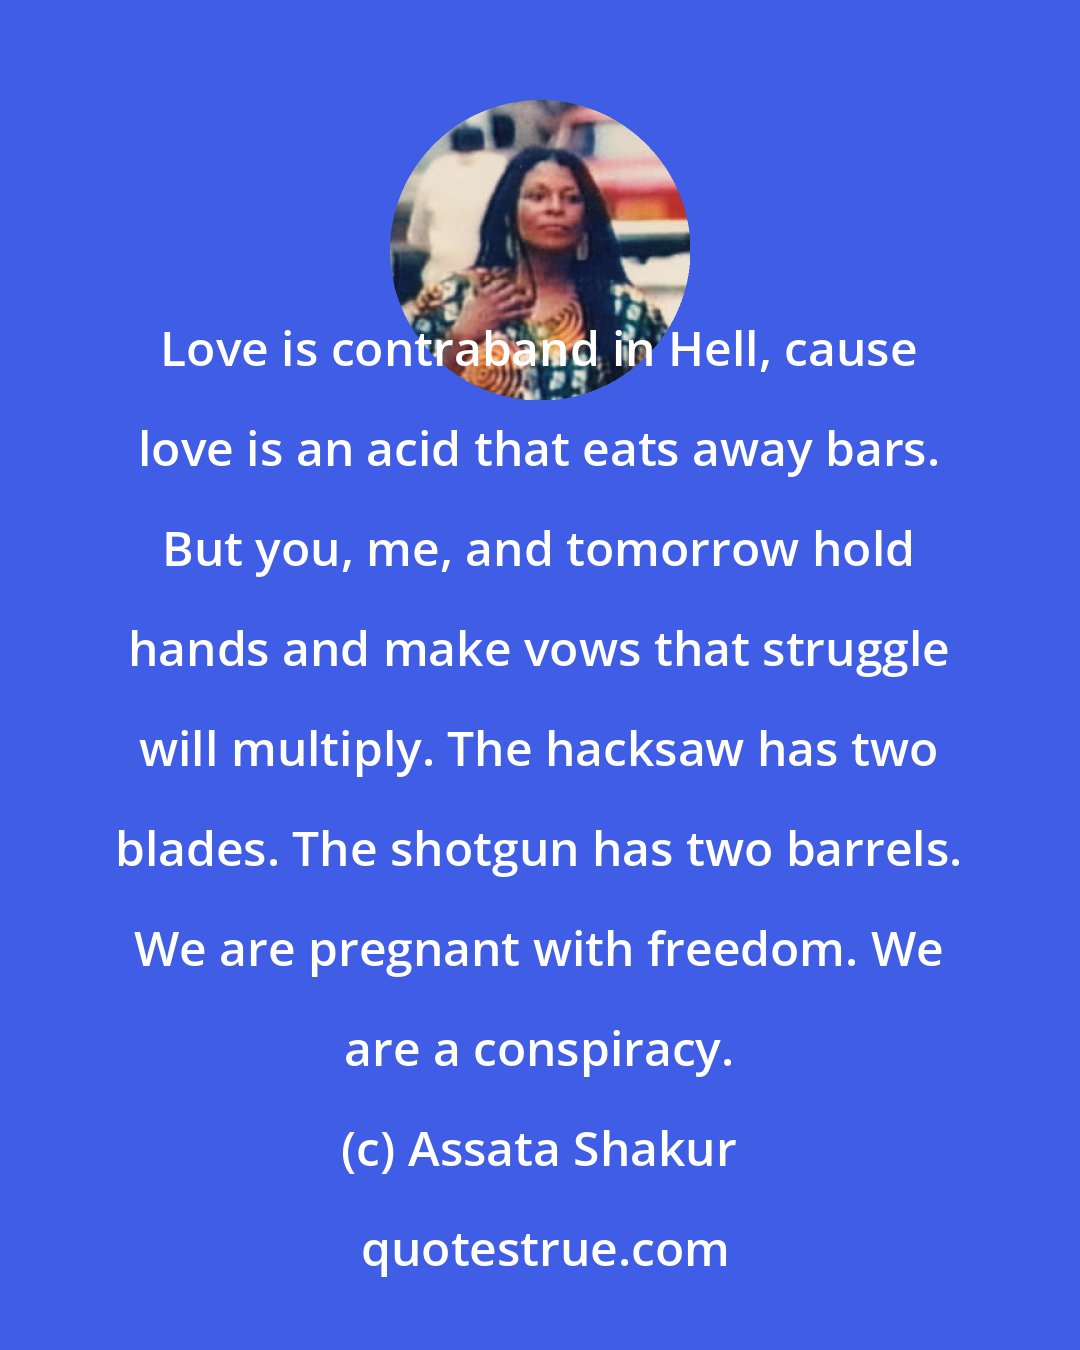 Assata Shakur: Love is contraband in Hell, cause love is an acid that eats away bars. But you, me, and tomorrow hold hands and make vows that struggle will multiply. The hacksaw has two blades. The shotgun has two barrels. We are pregnant with freedom. We are a conspiracy.